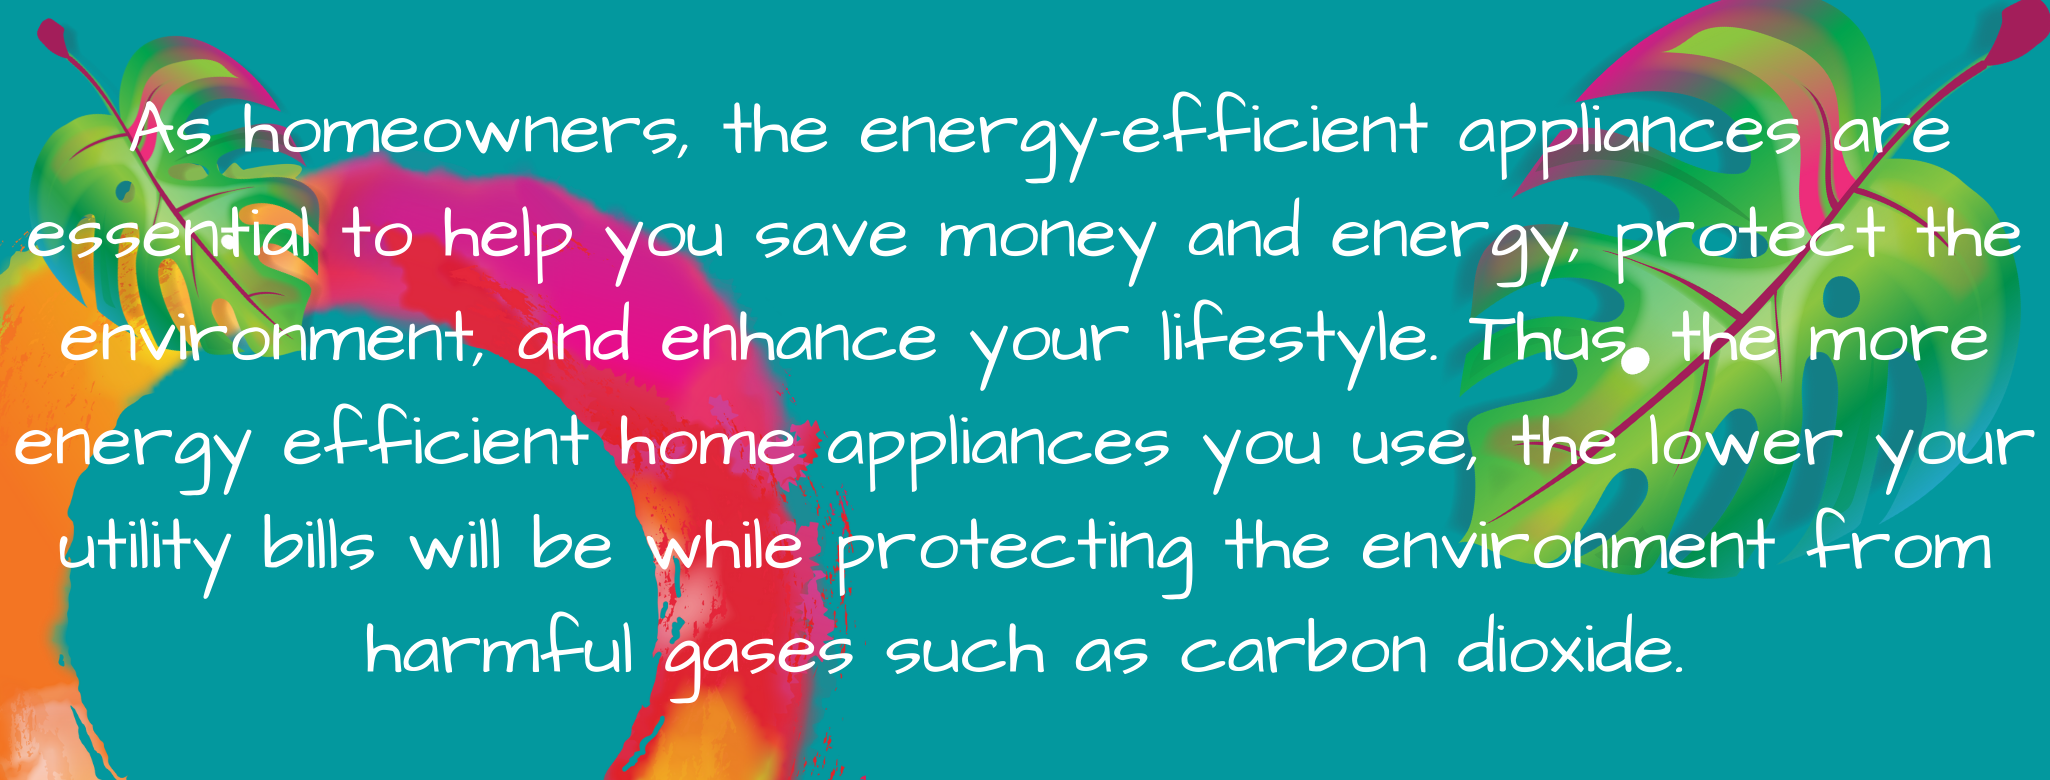 energy saving appliances are better for the environment